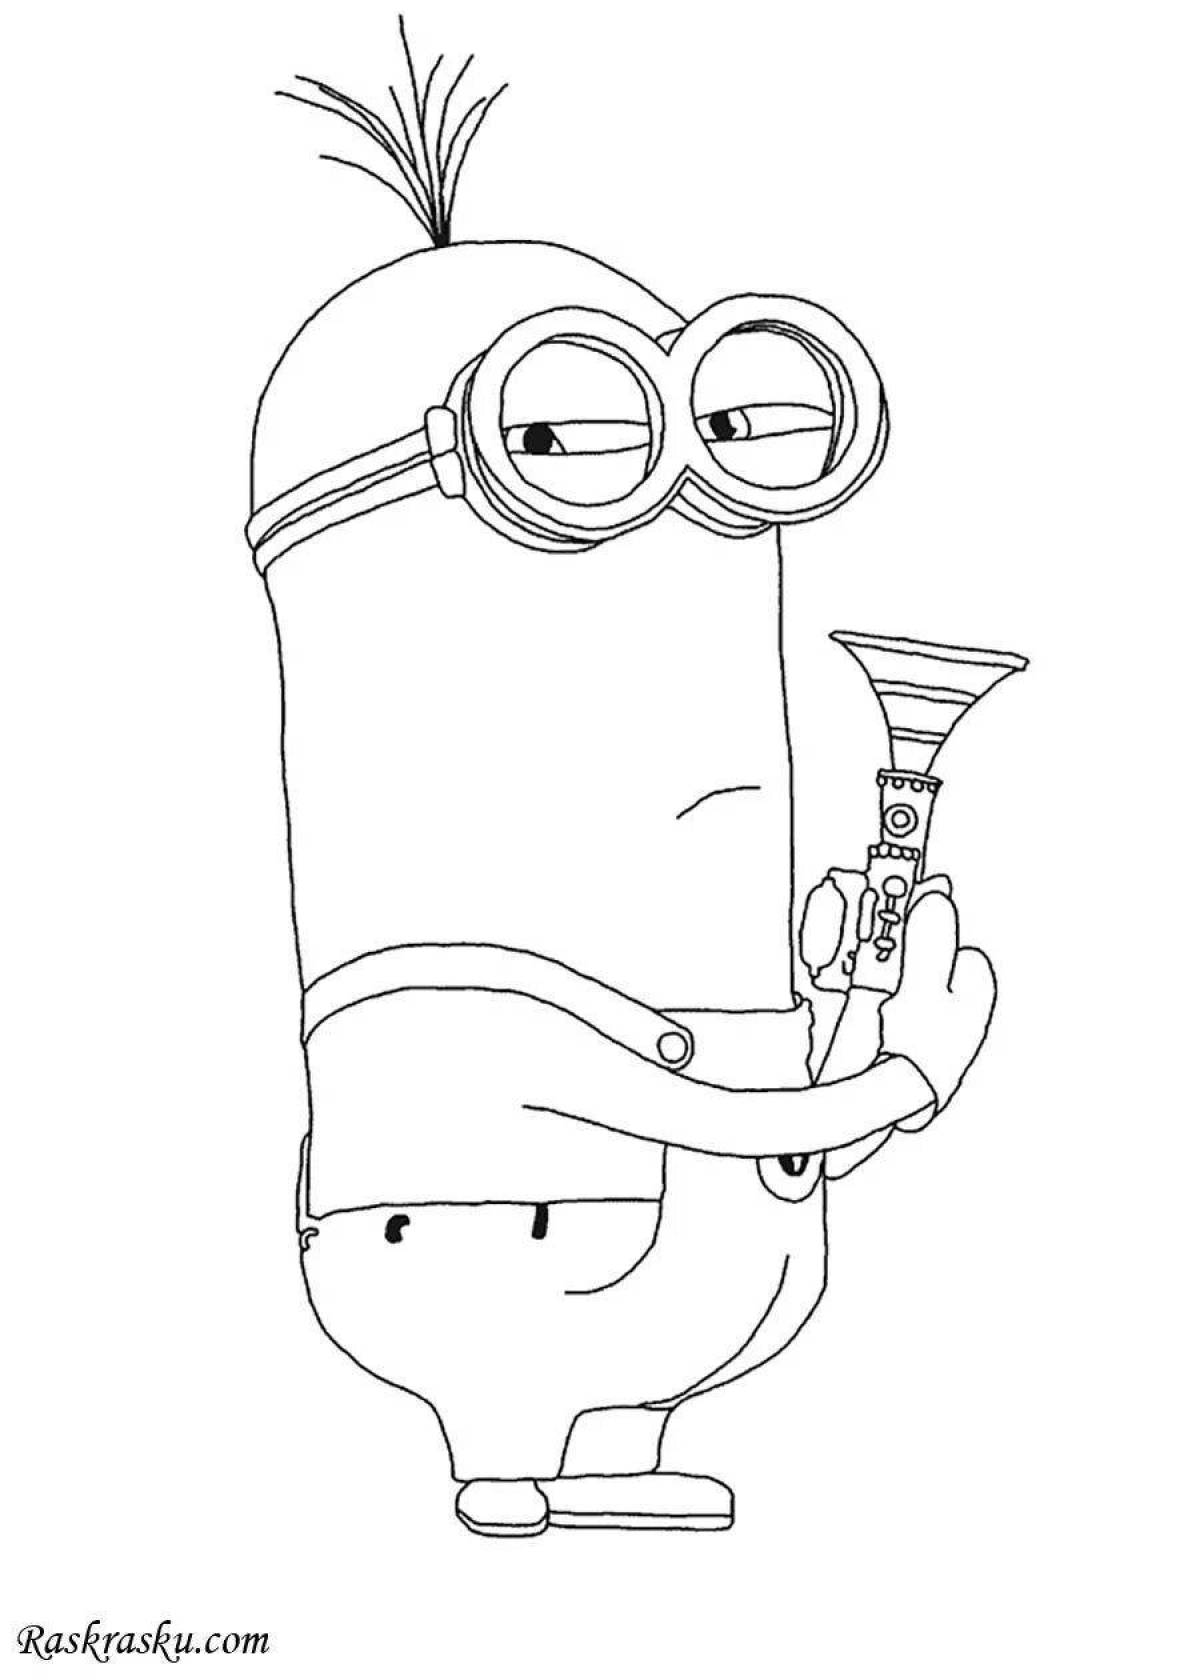 Coloring page minions despicable me